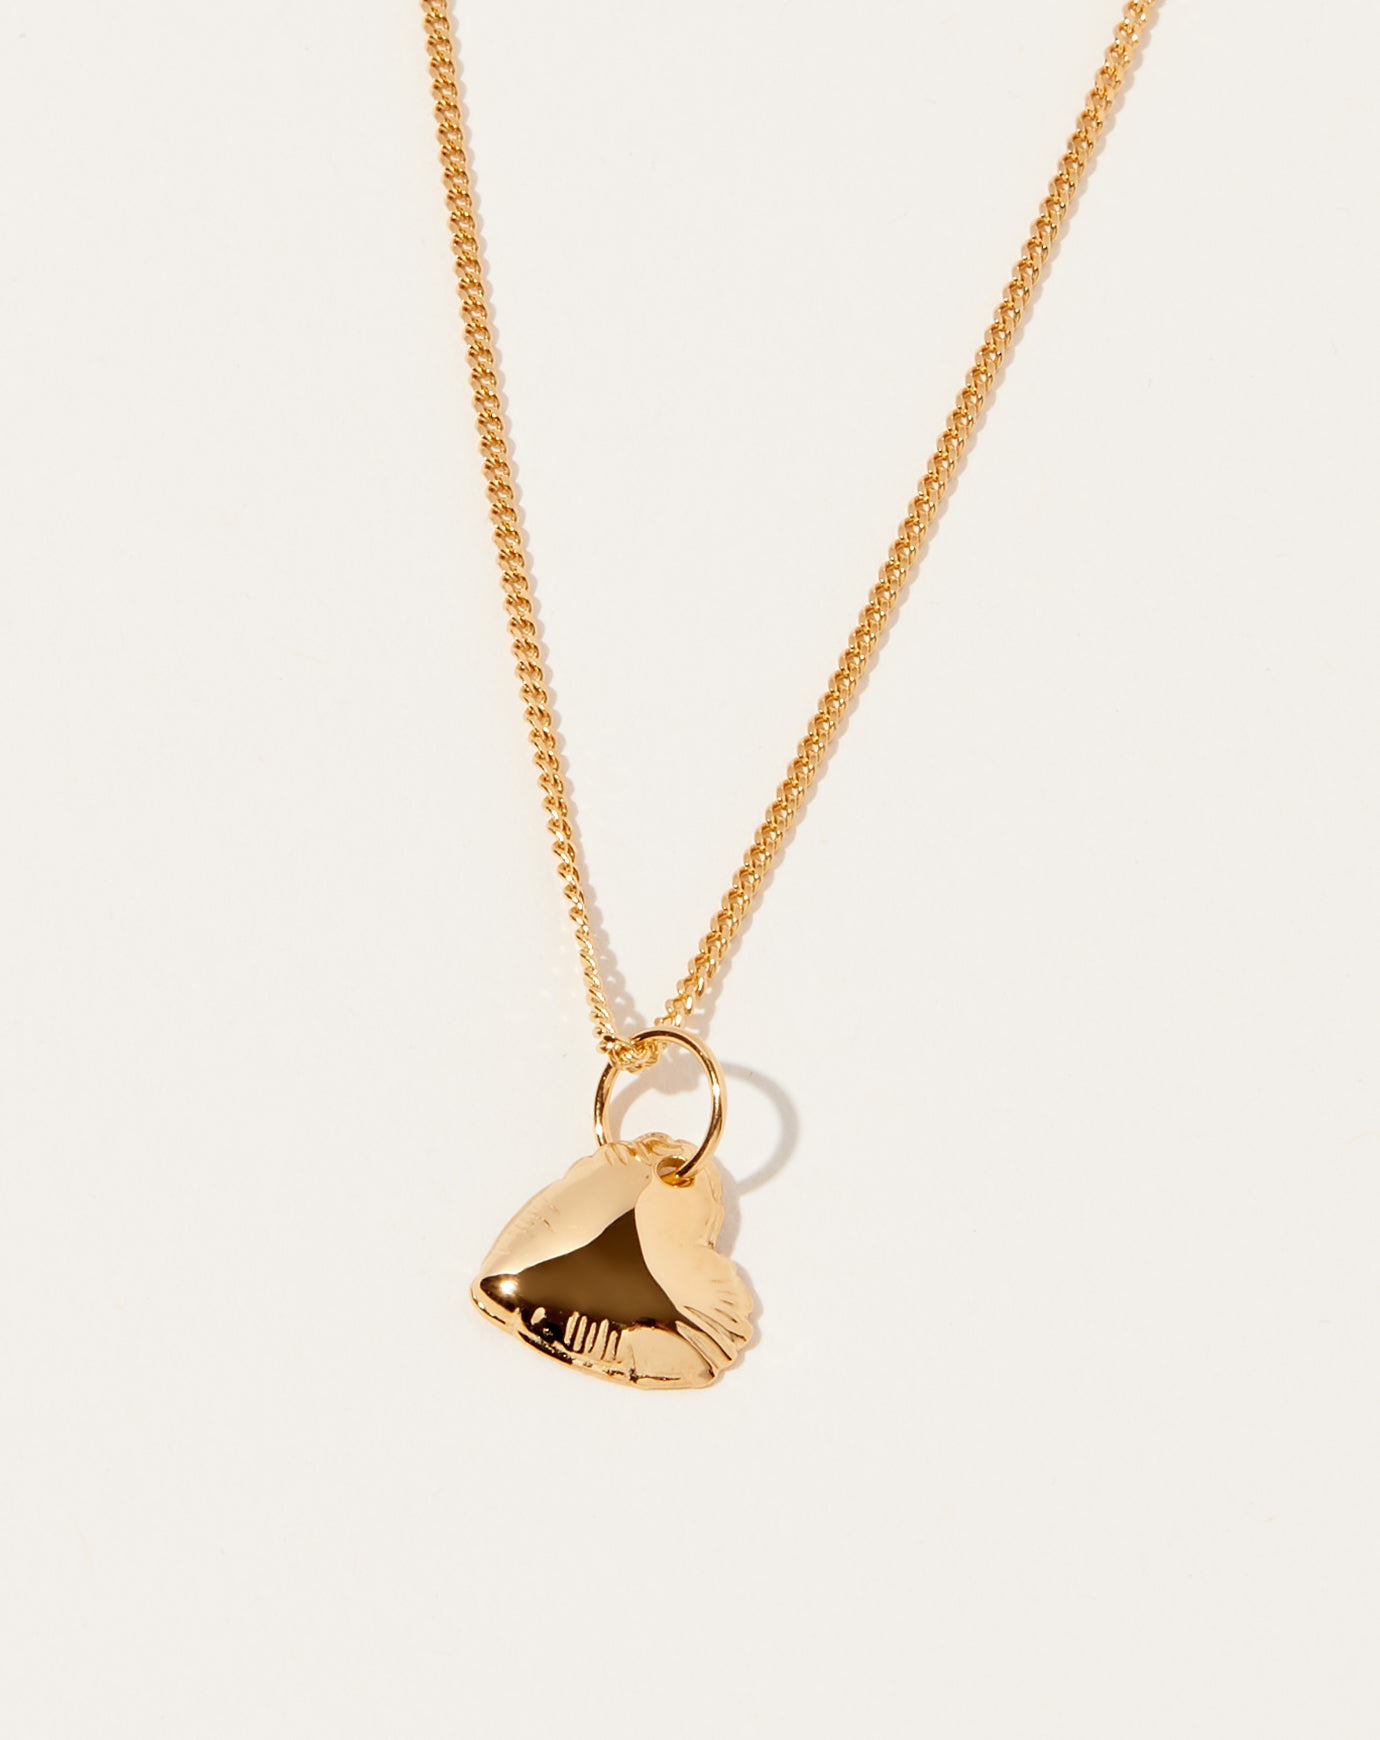 Love Letters Necklace Heart, gold